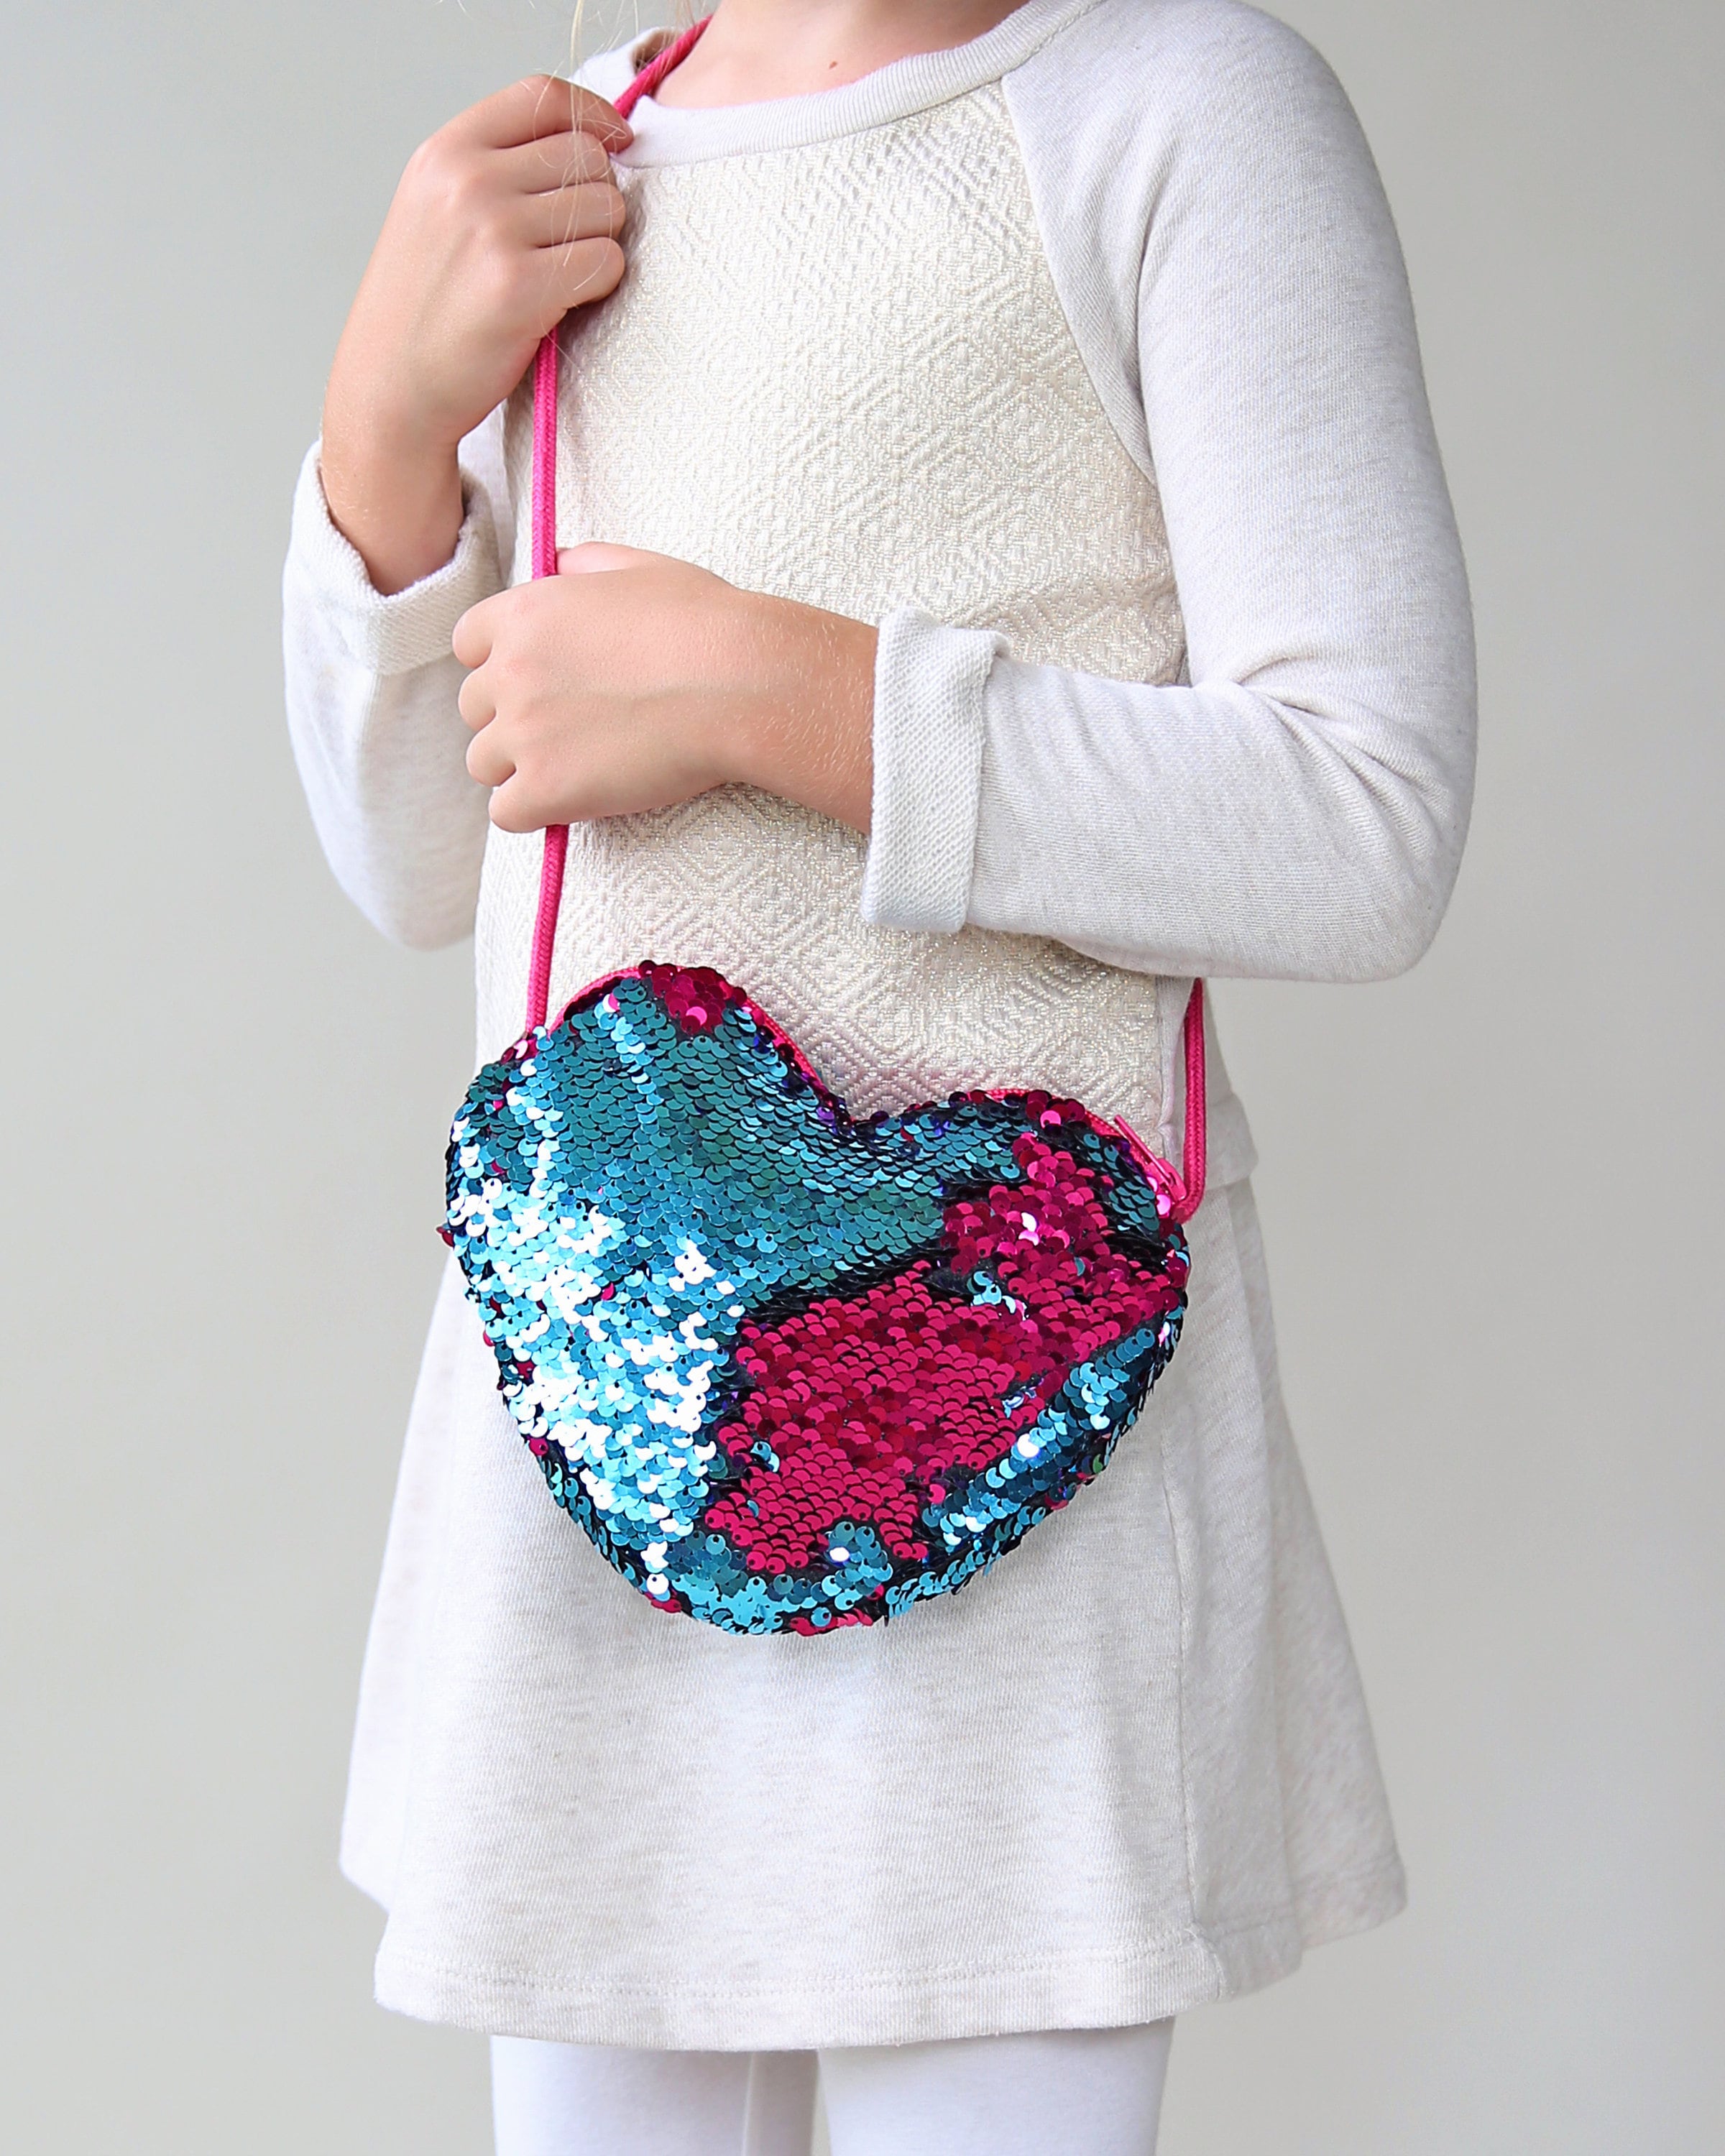 Heart Home Hand Bag, Sequins Silk Embroidery Purse